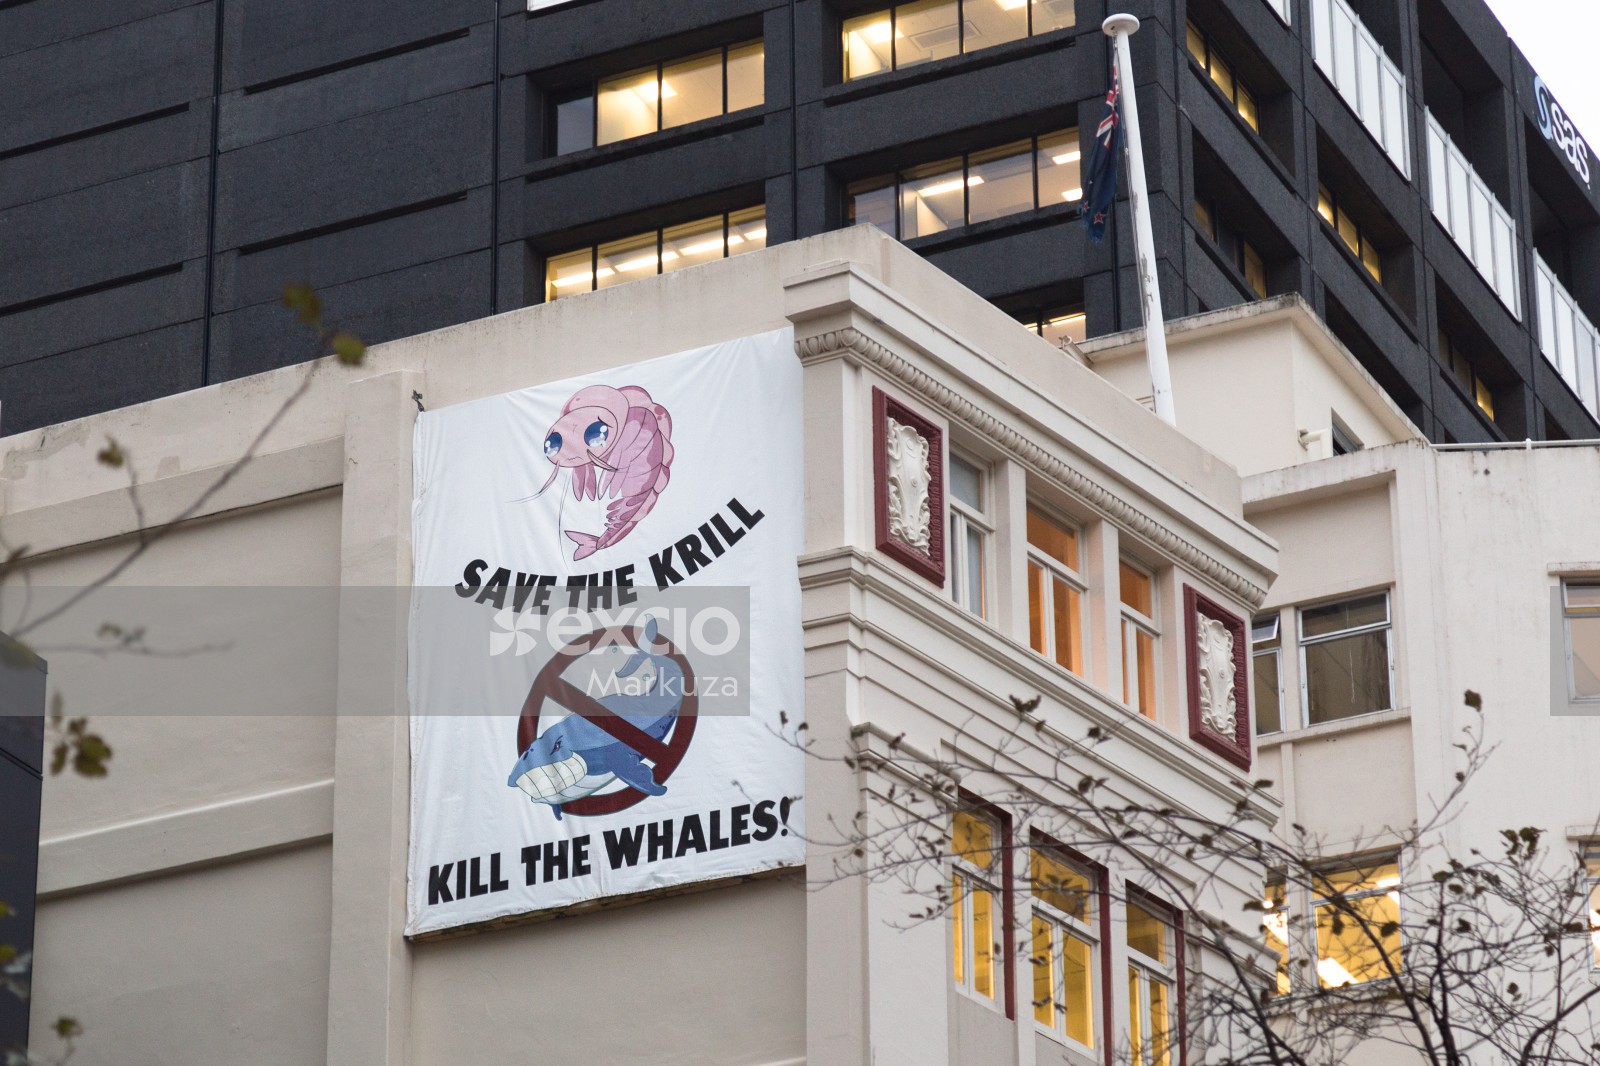 Save the krill! kill the whales banner